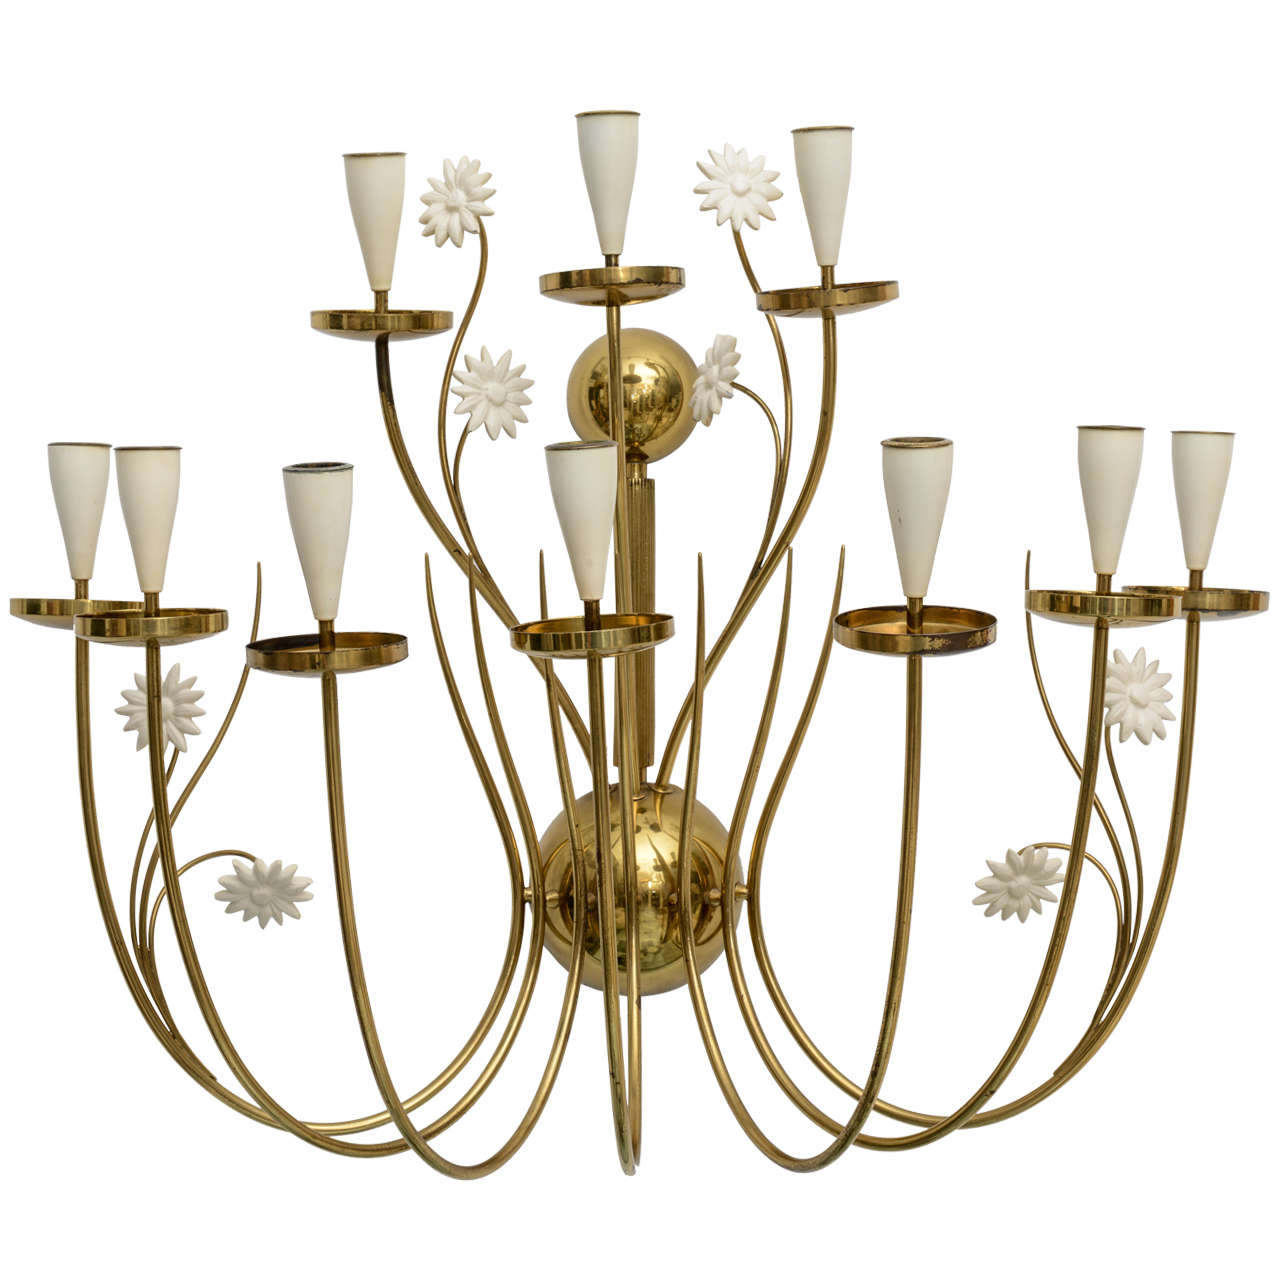 Large-Scale 50's Italian Brass Candle Sconce